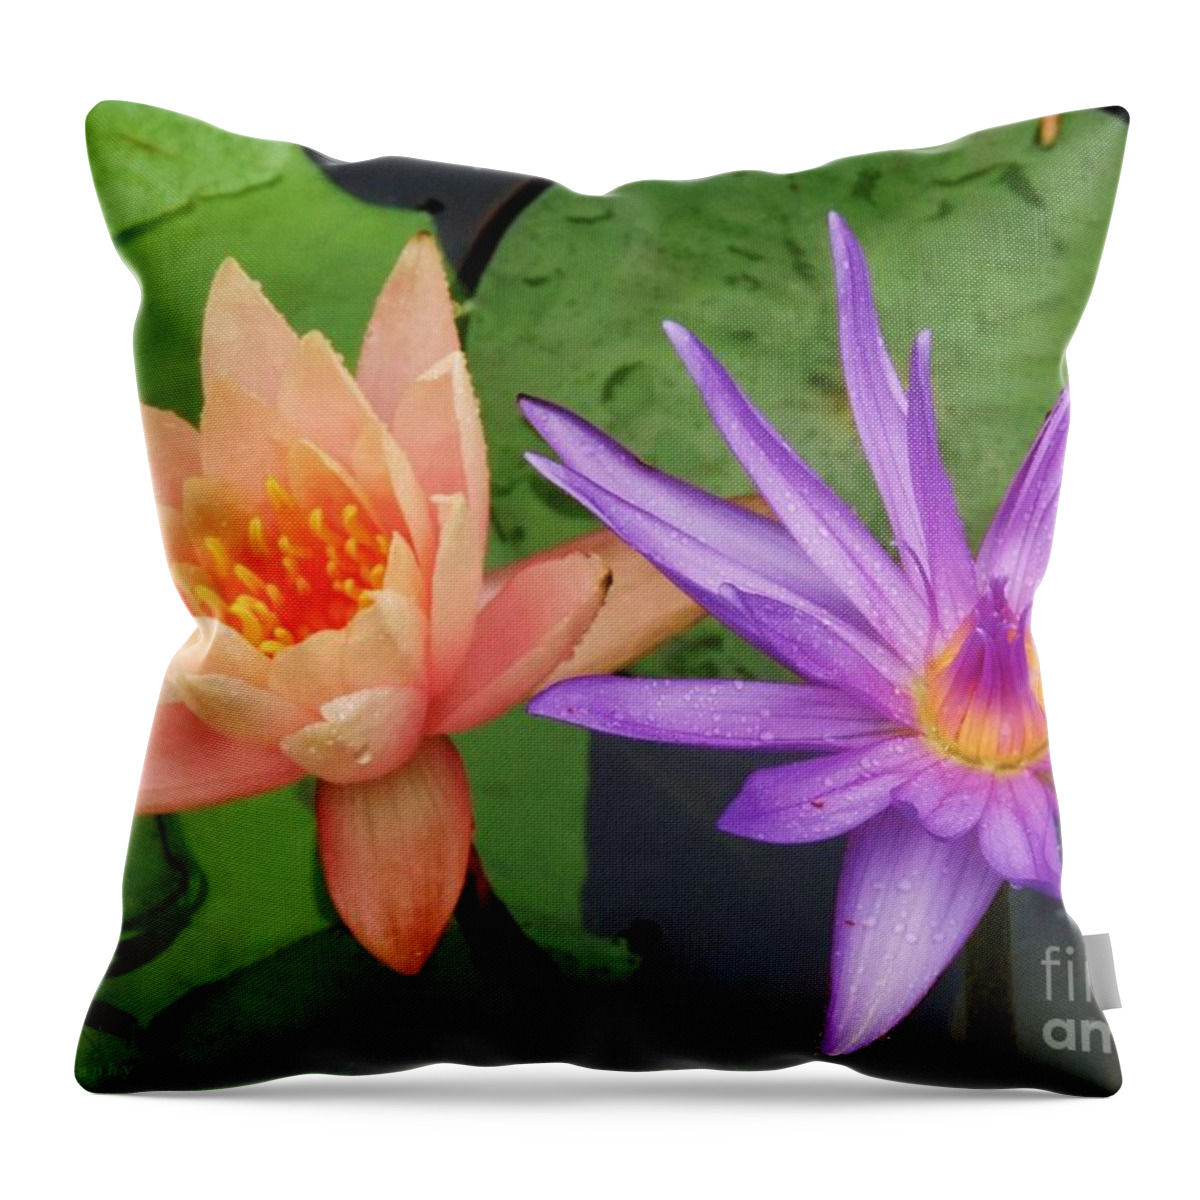 Water Lilies Throw Pillow featuring the photograph Water Lilies 011 by Robert ONeil